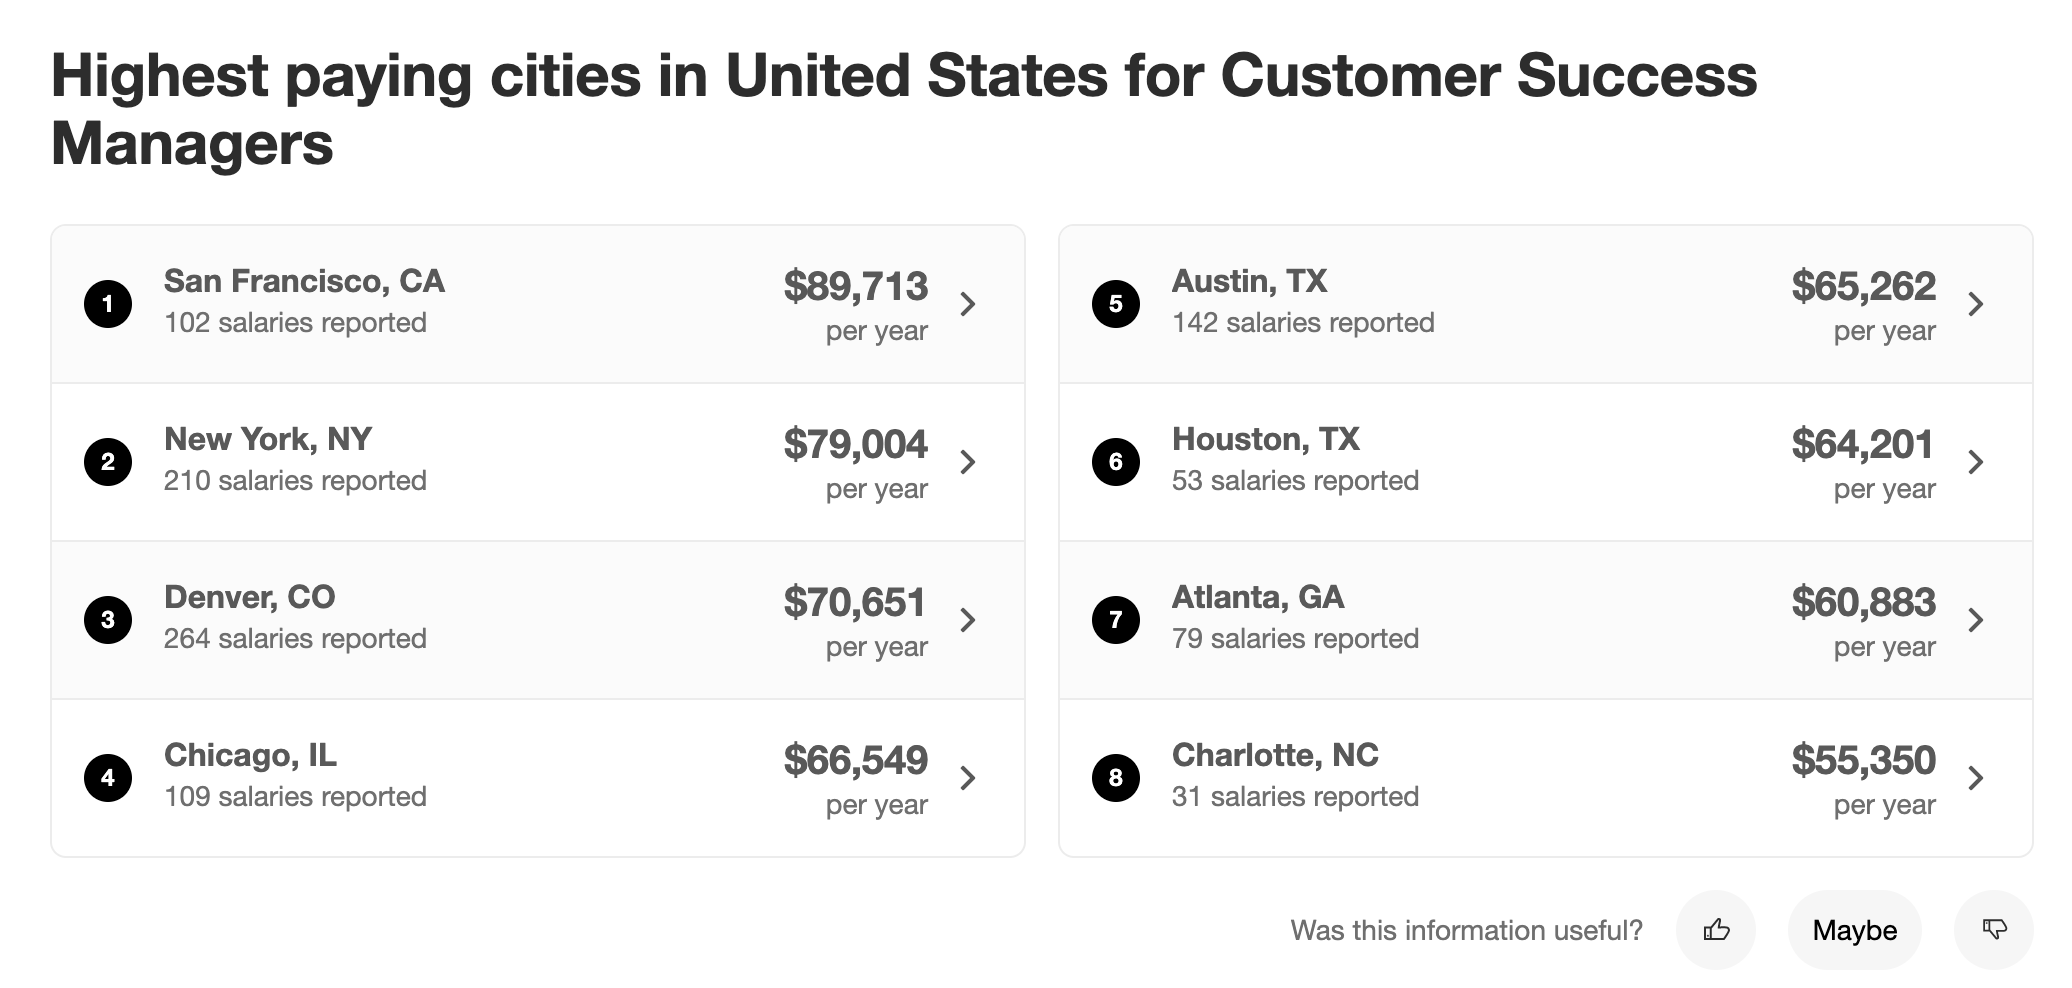 highest paying cities for customer success managers